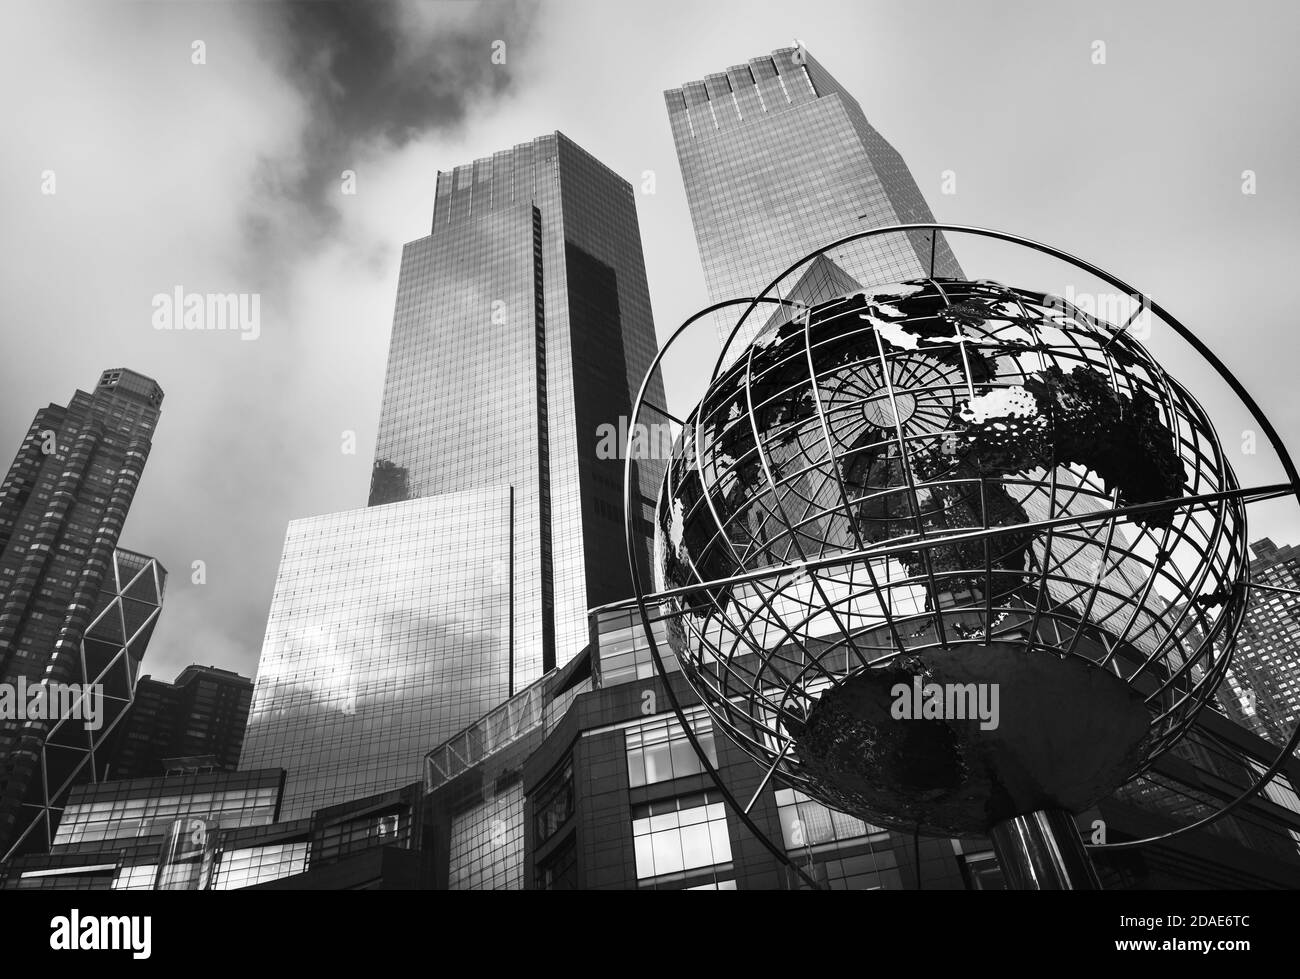 New York, USA - Sep 16, 2017:  Black and white image of iconic sculpture of Earth in front of Trump Towers at Columbus Circle in Manhattan. Stainless Stock Photo